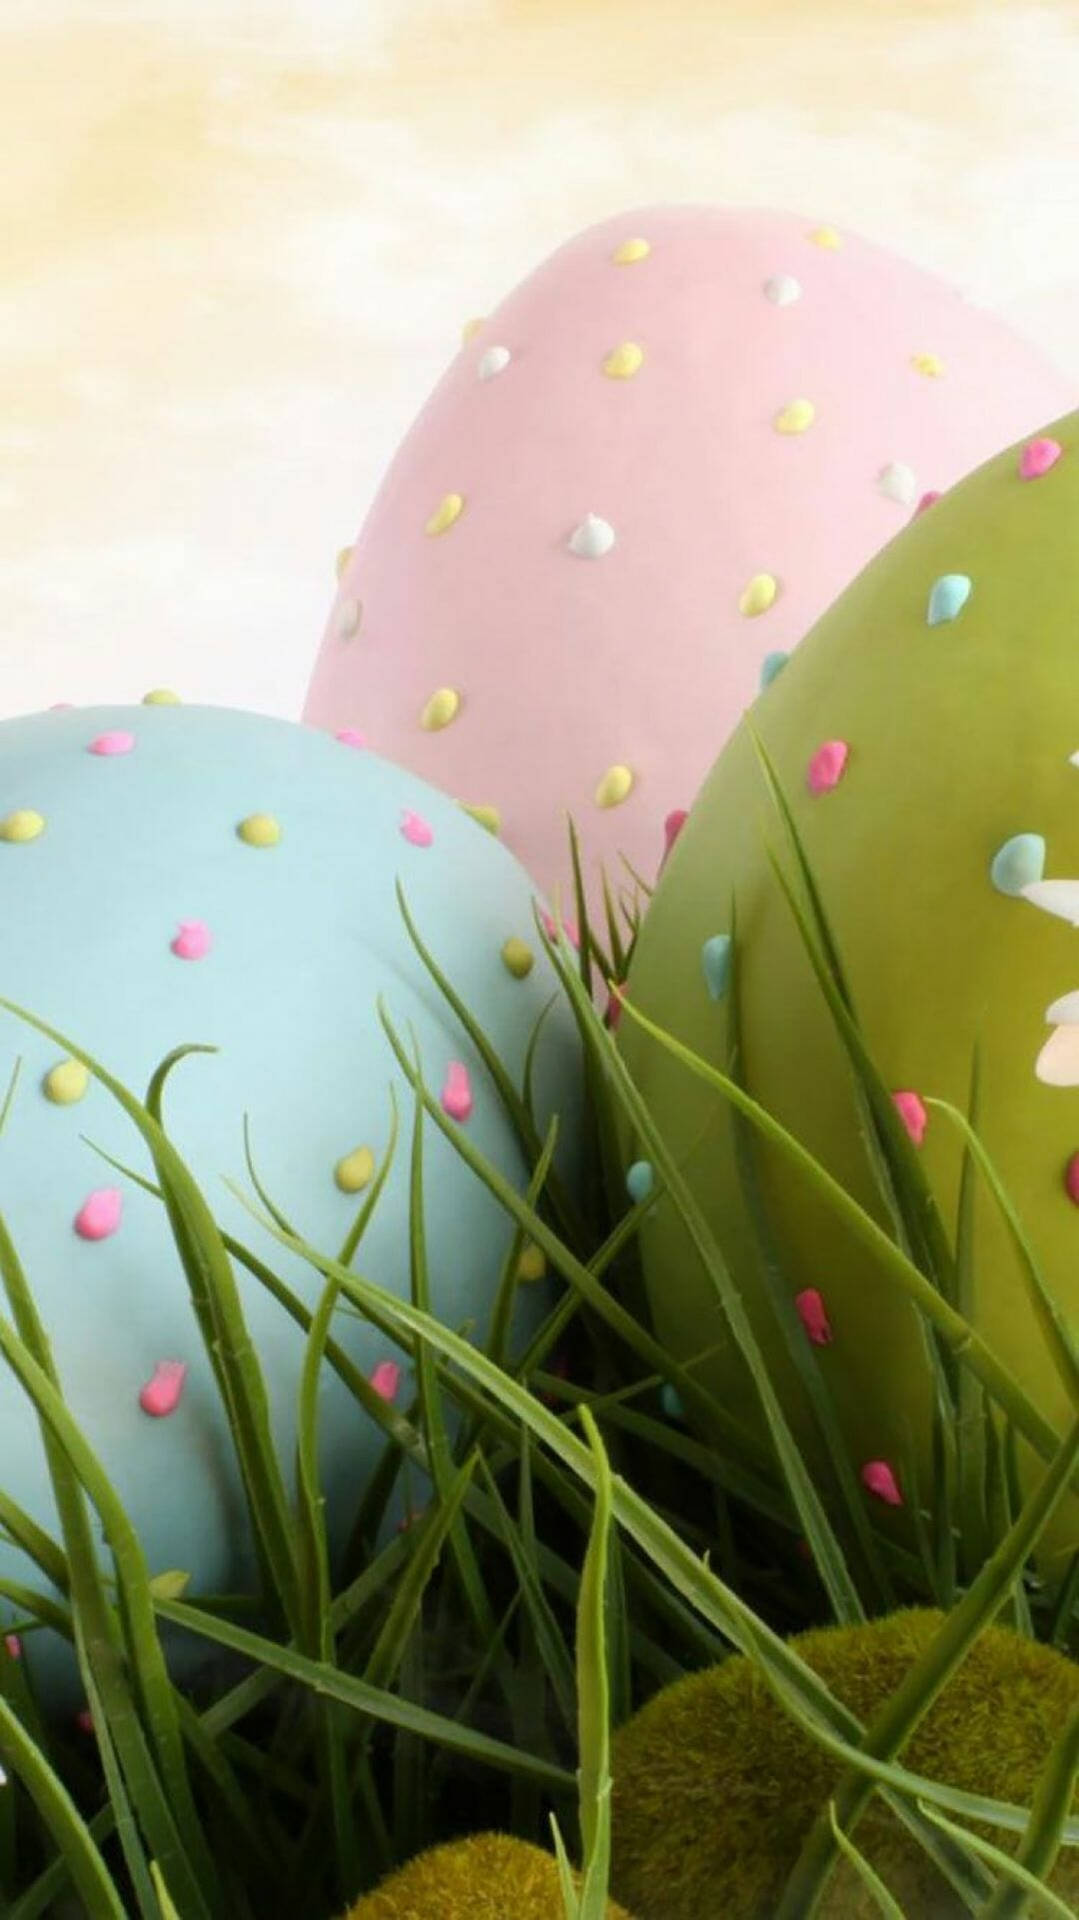 Pastel Easter Eggs Iphone Wallpaper Background